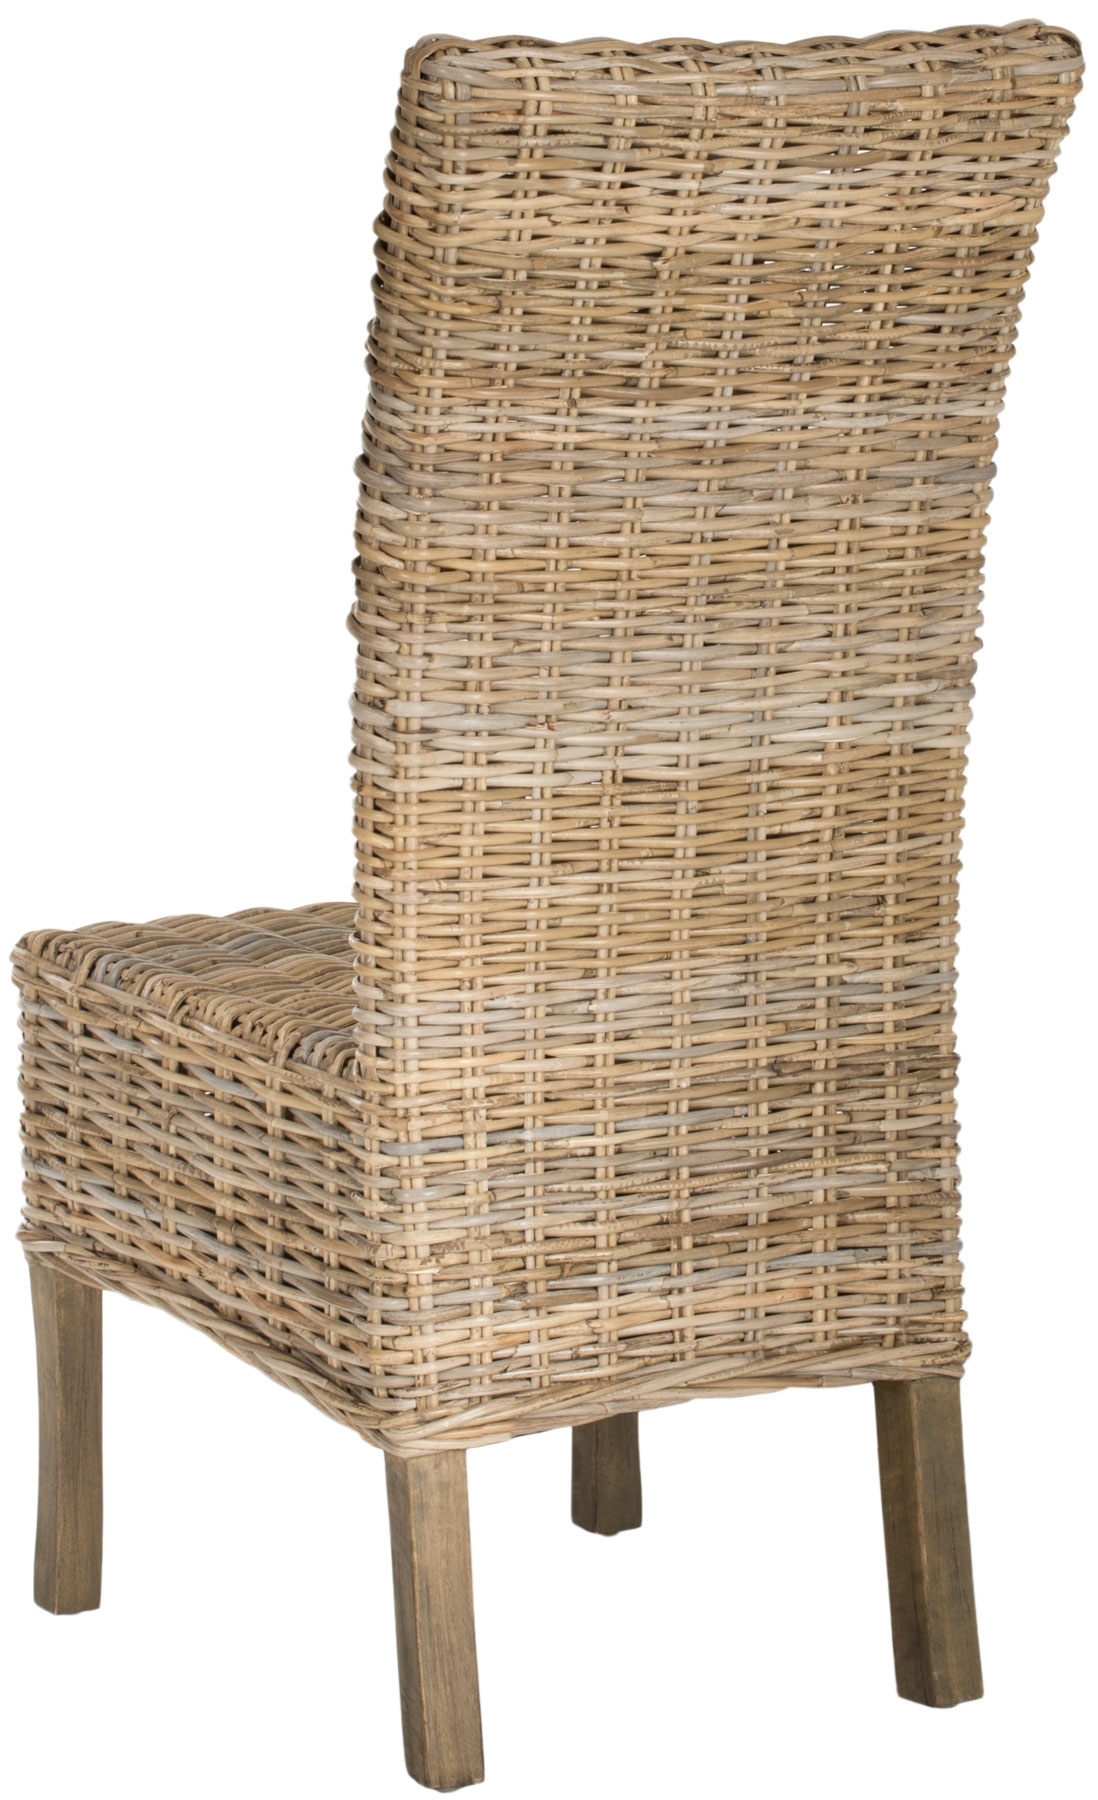 Quaker 19''H Rattan Side Chair - Natural Unfinished - Safavieh - Image 2